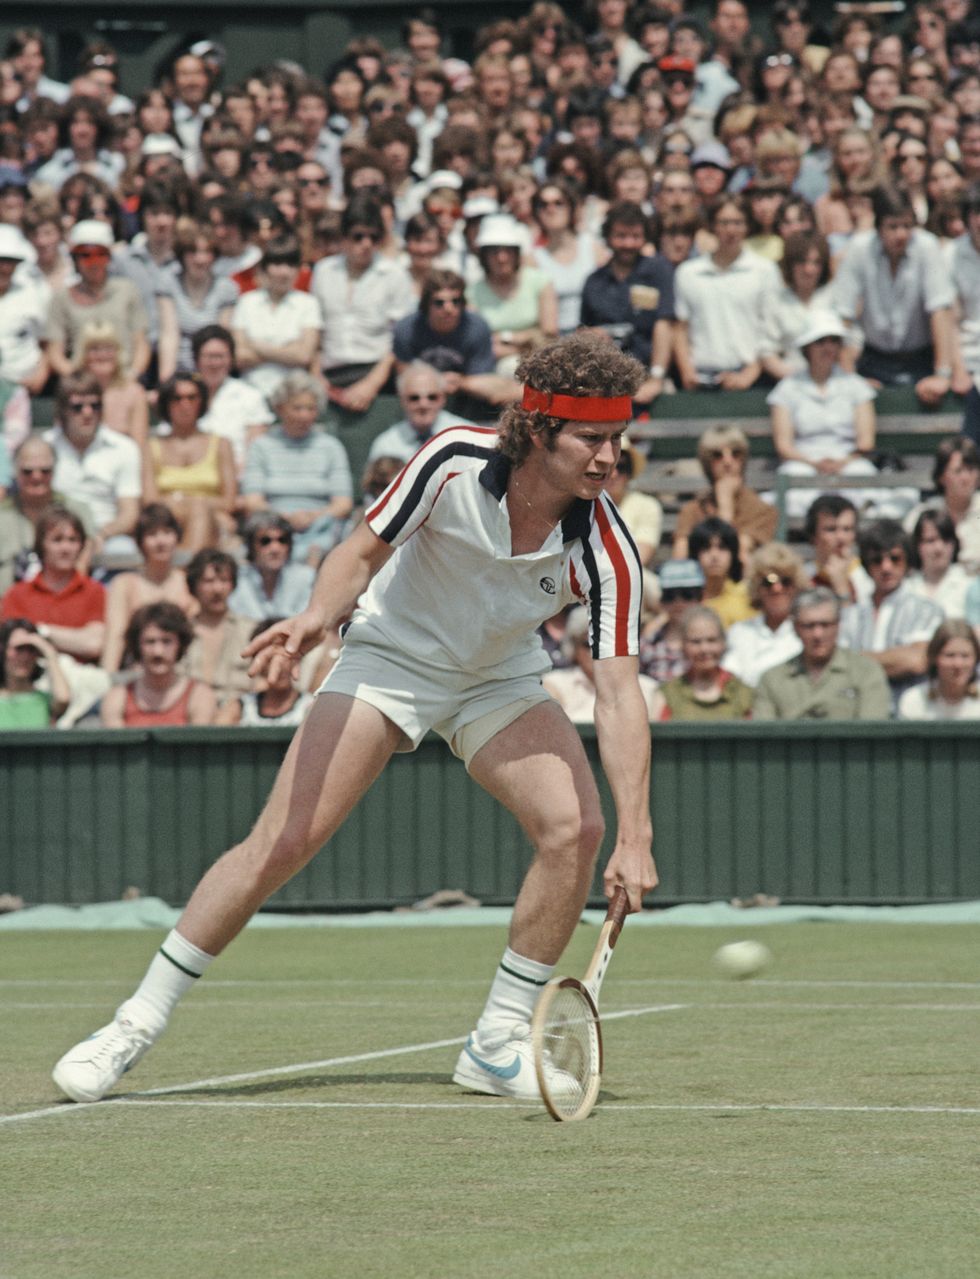 john mcenroe of the united states makes a low forehand return against buster mottram during their mens singles second round match at the wimbledon lawn tennis championship on 27 june 1979 at the all england lawn tennis and croquet club in wimbledon in london, england  photo by tony duffyallsportgetty images